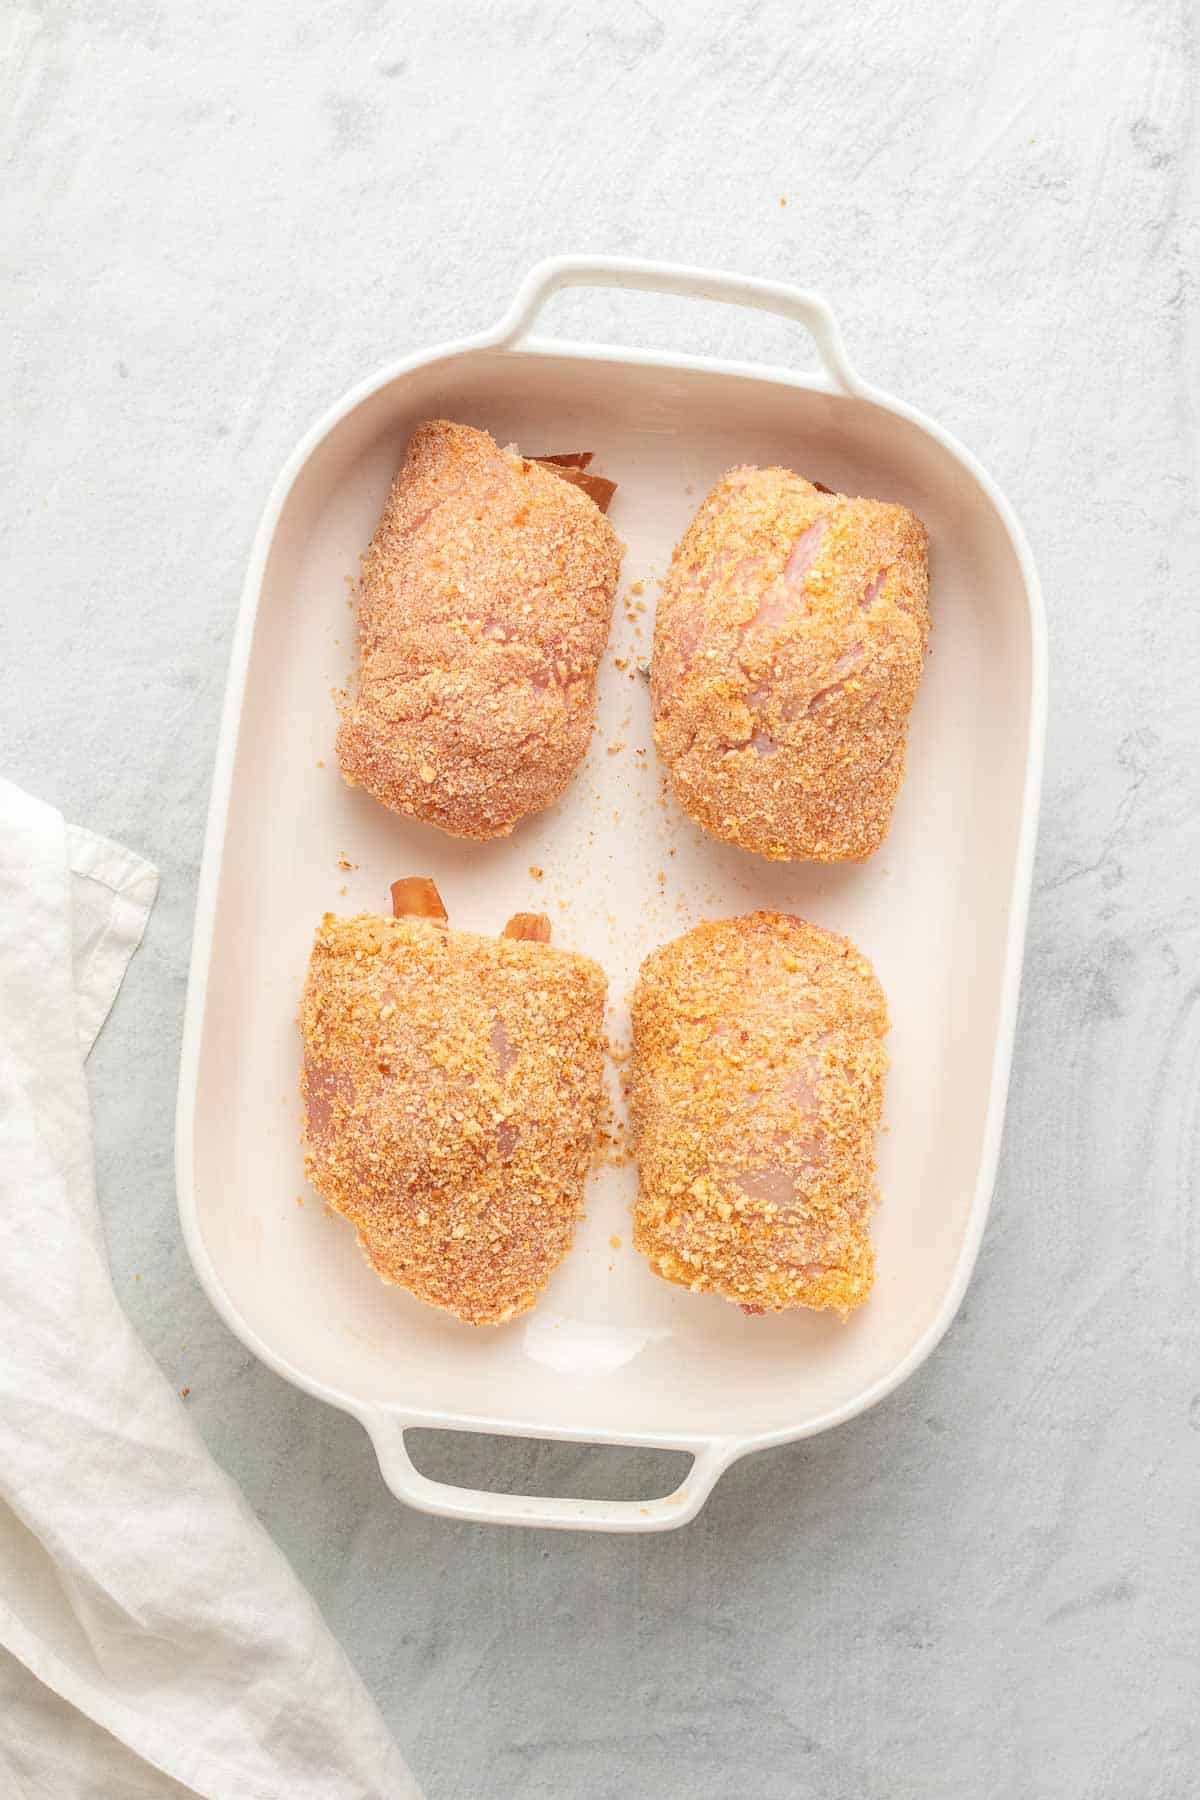 Four breaded and rolled chicken breasts in a white baking dish, as seen from above